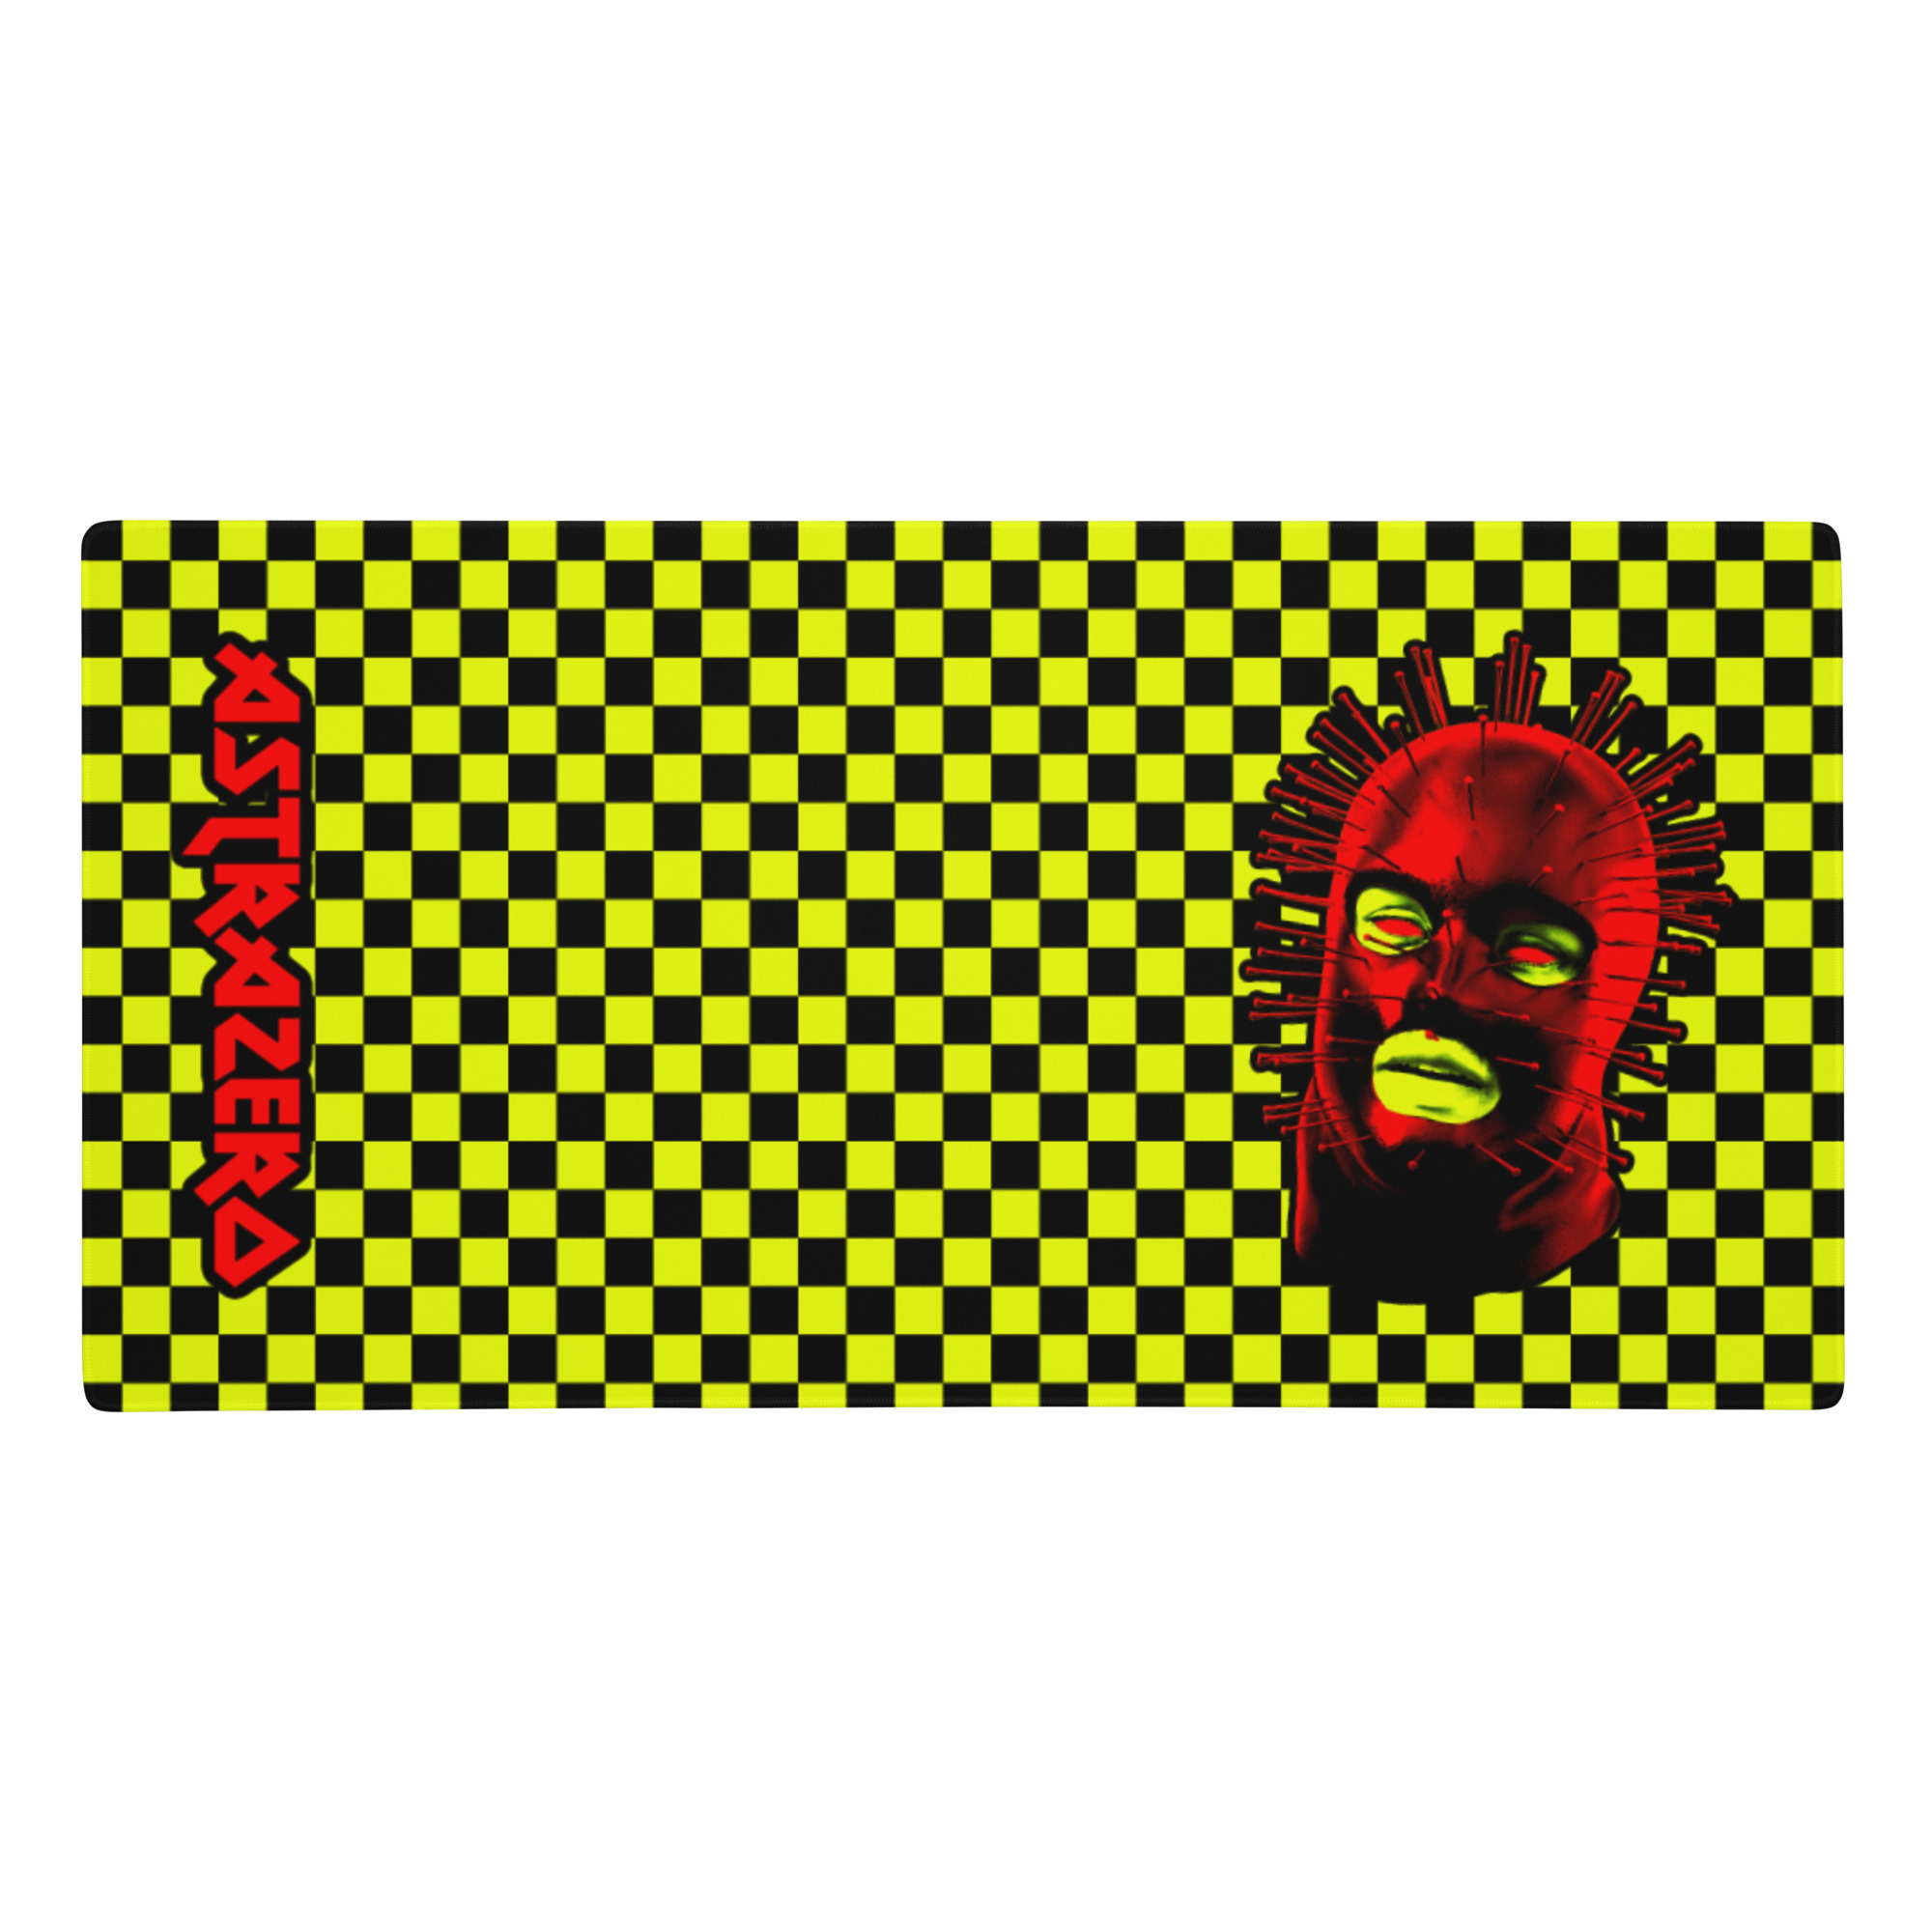 Featured image for “Bile Checker Punk pin - Gaming mouse pad”